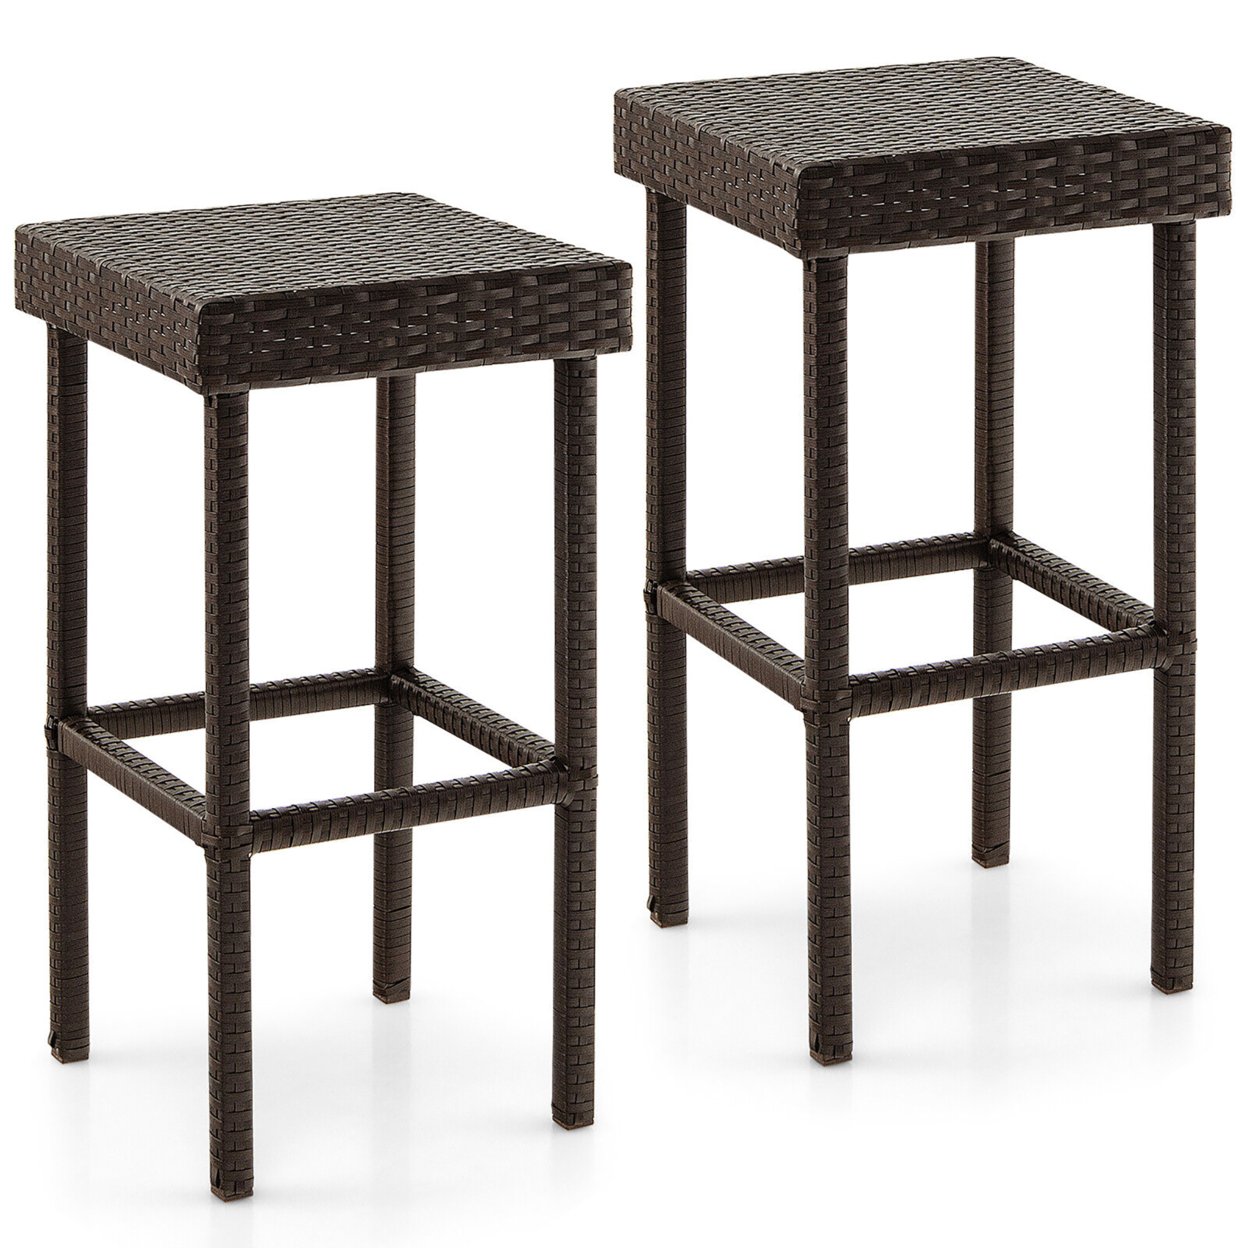 Patio 2 PCS Rattan Wicker Bar Stool Chairs Counter Height Barstools